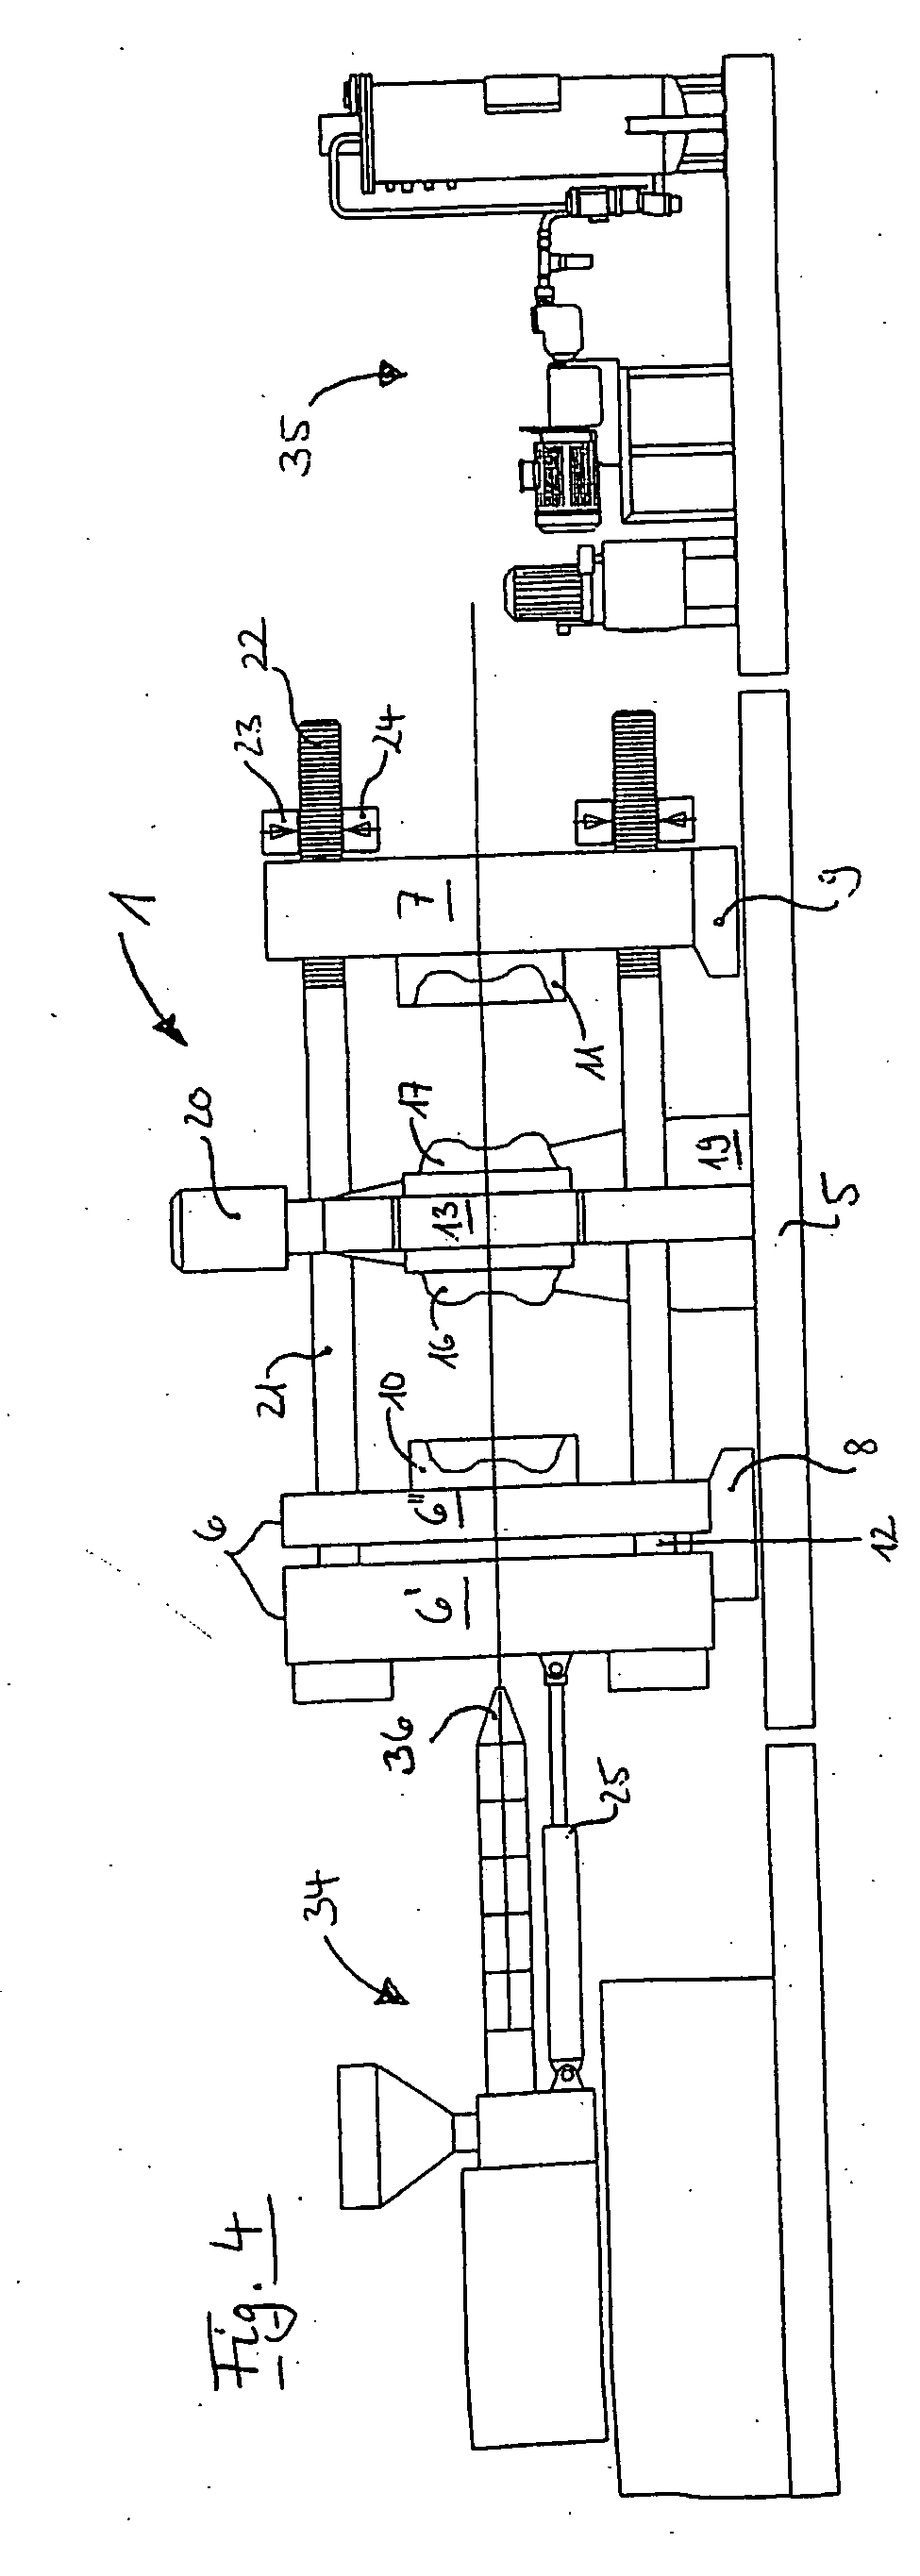 Mold closing device for an injection molding machine